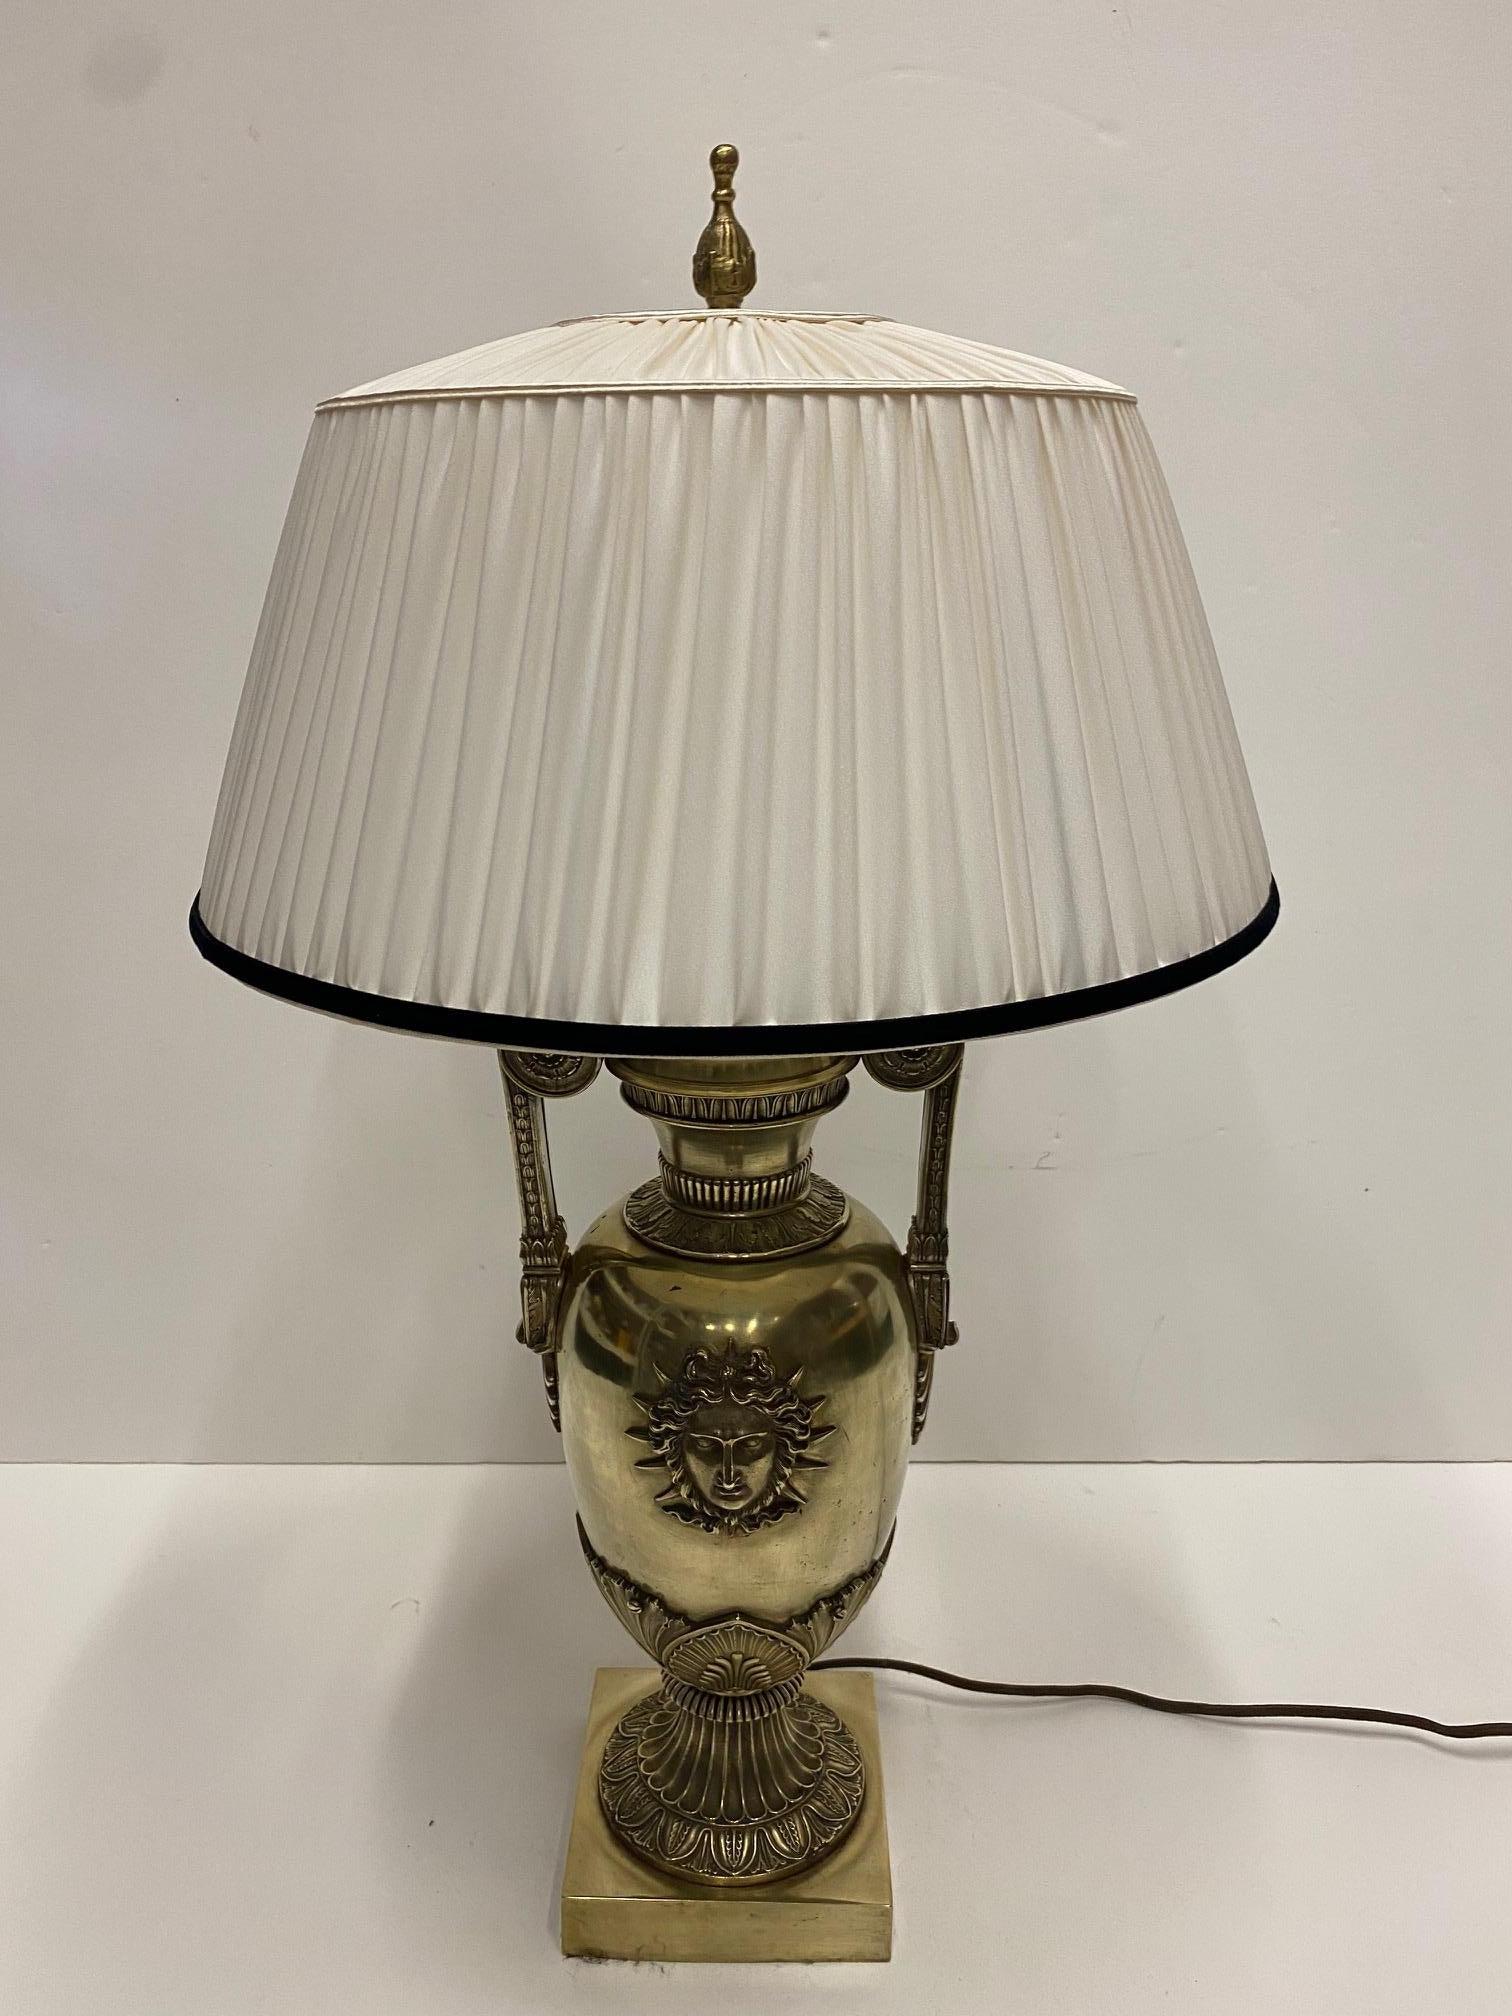 A particularly beautiful French cast bronze table lamp having central mythological face perhaps of a sun god, including custom silk shade and silk cord on wire.
Lamp itself measures: 27 H, 7 W, 7 D.